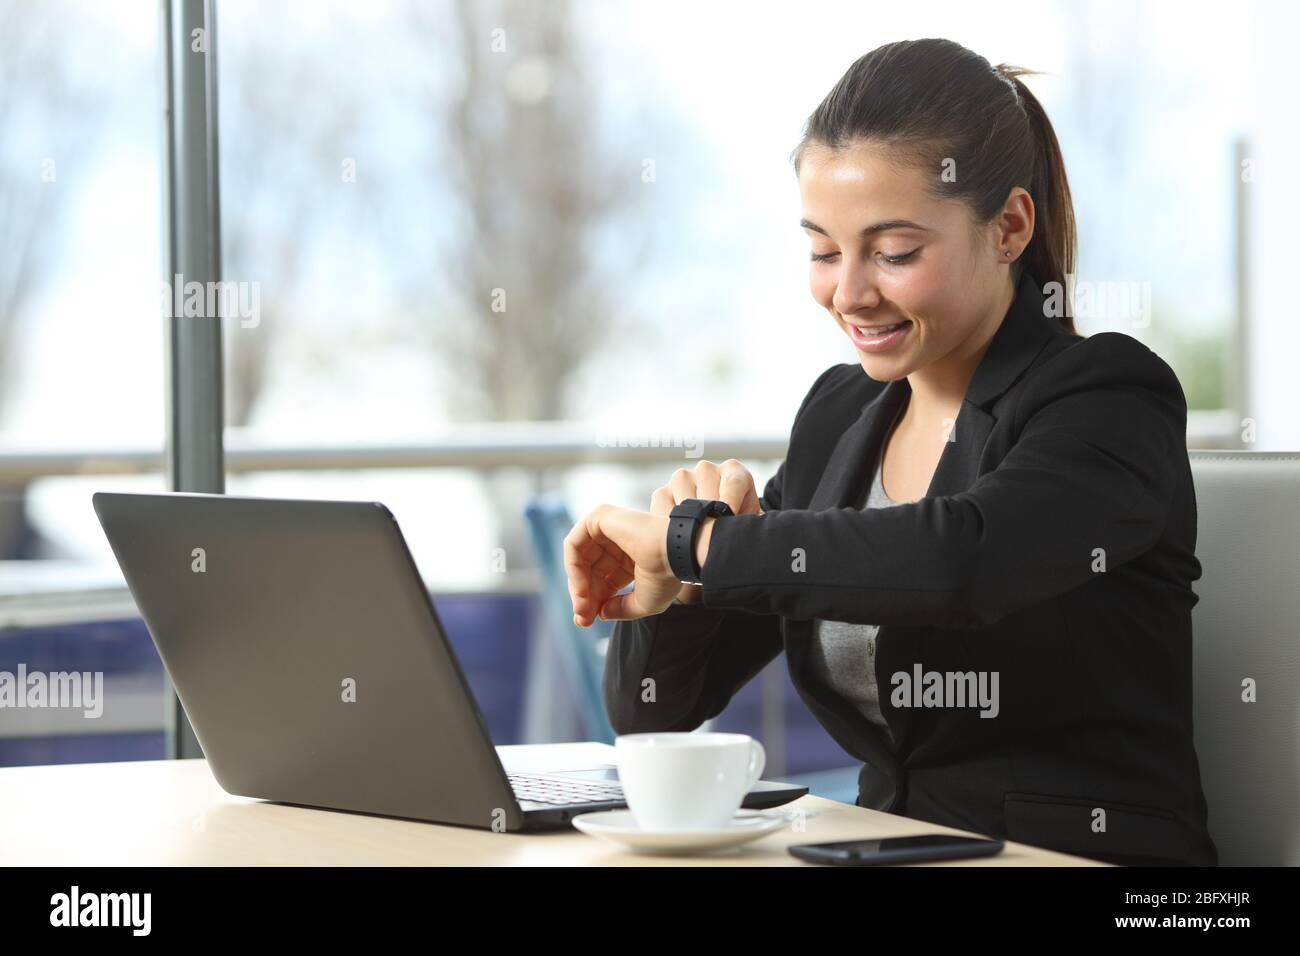 Happy entrepreneur woman checking smartwatch sitting in a coffee shop Stock Photo